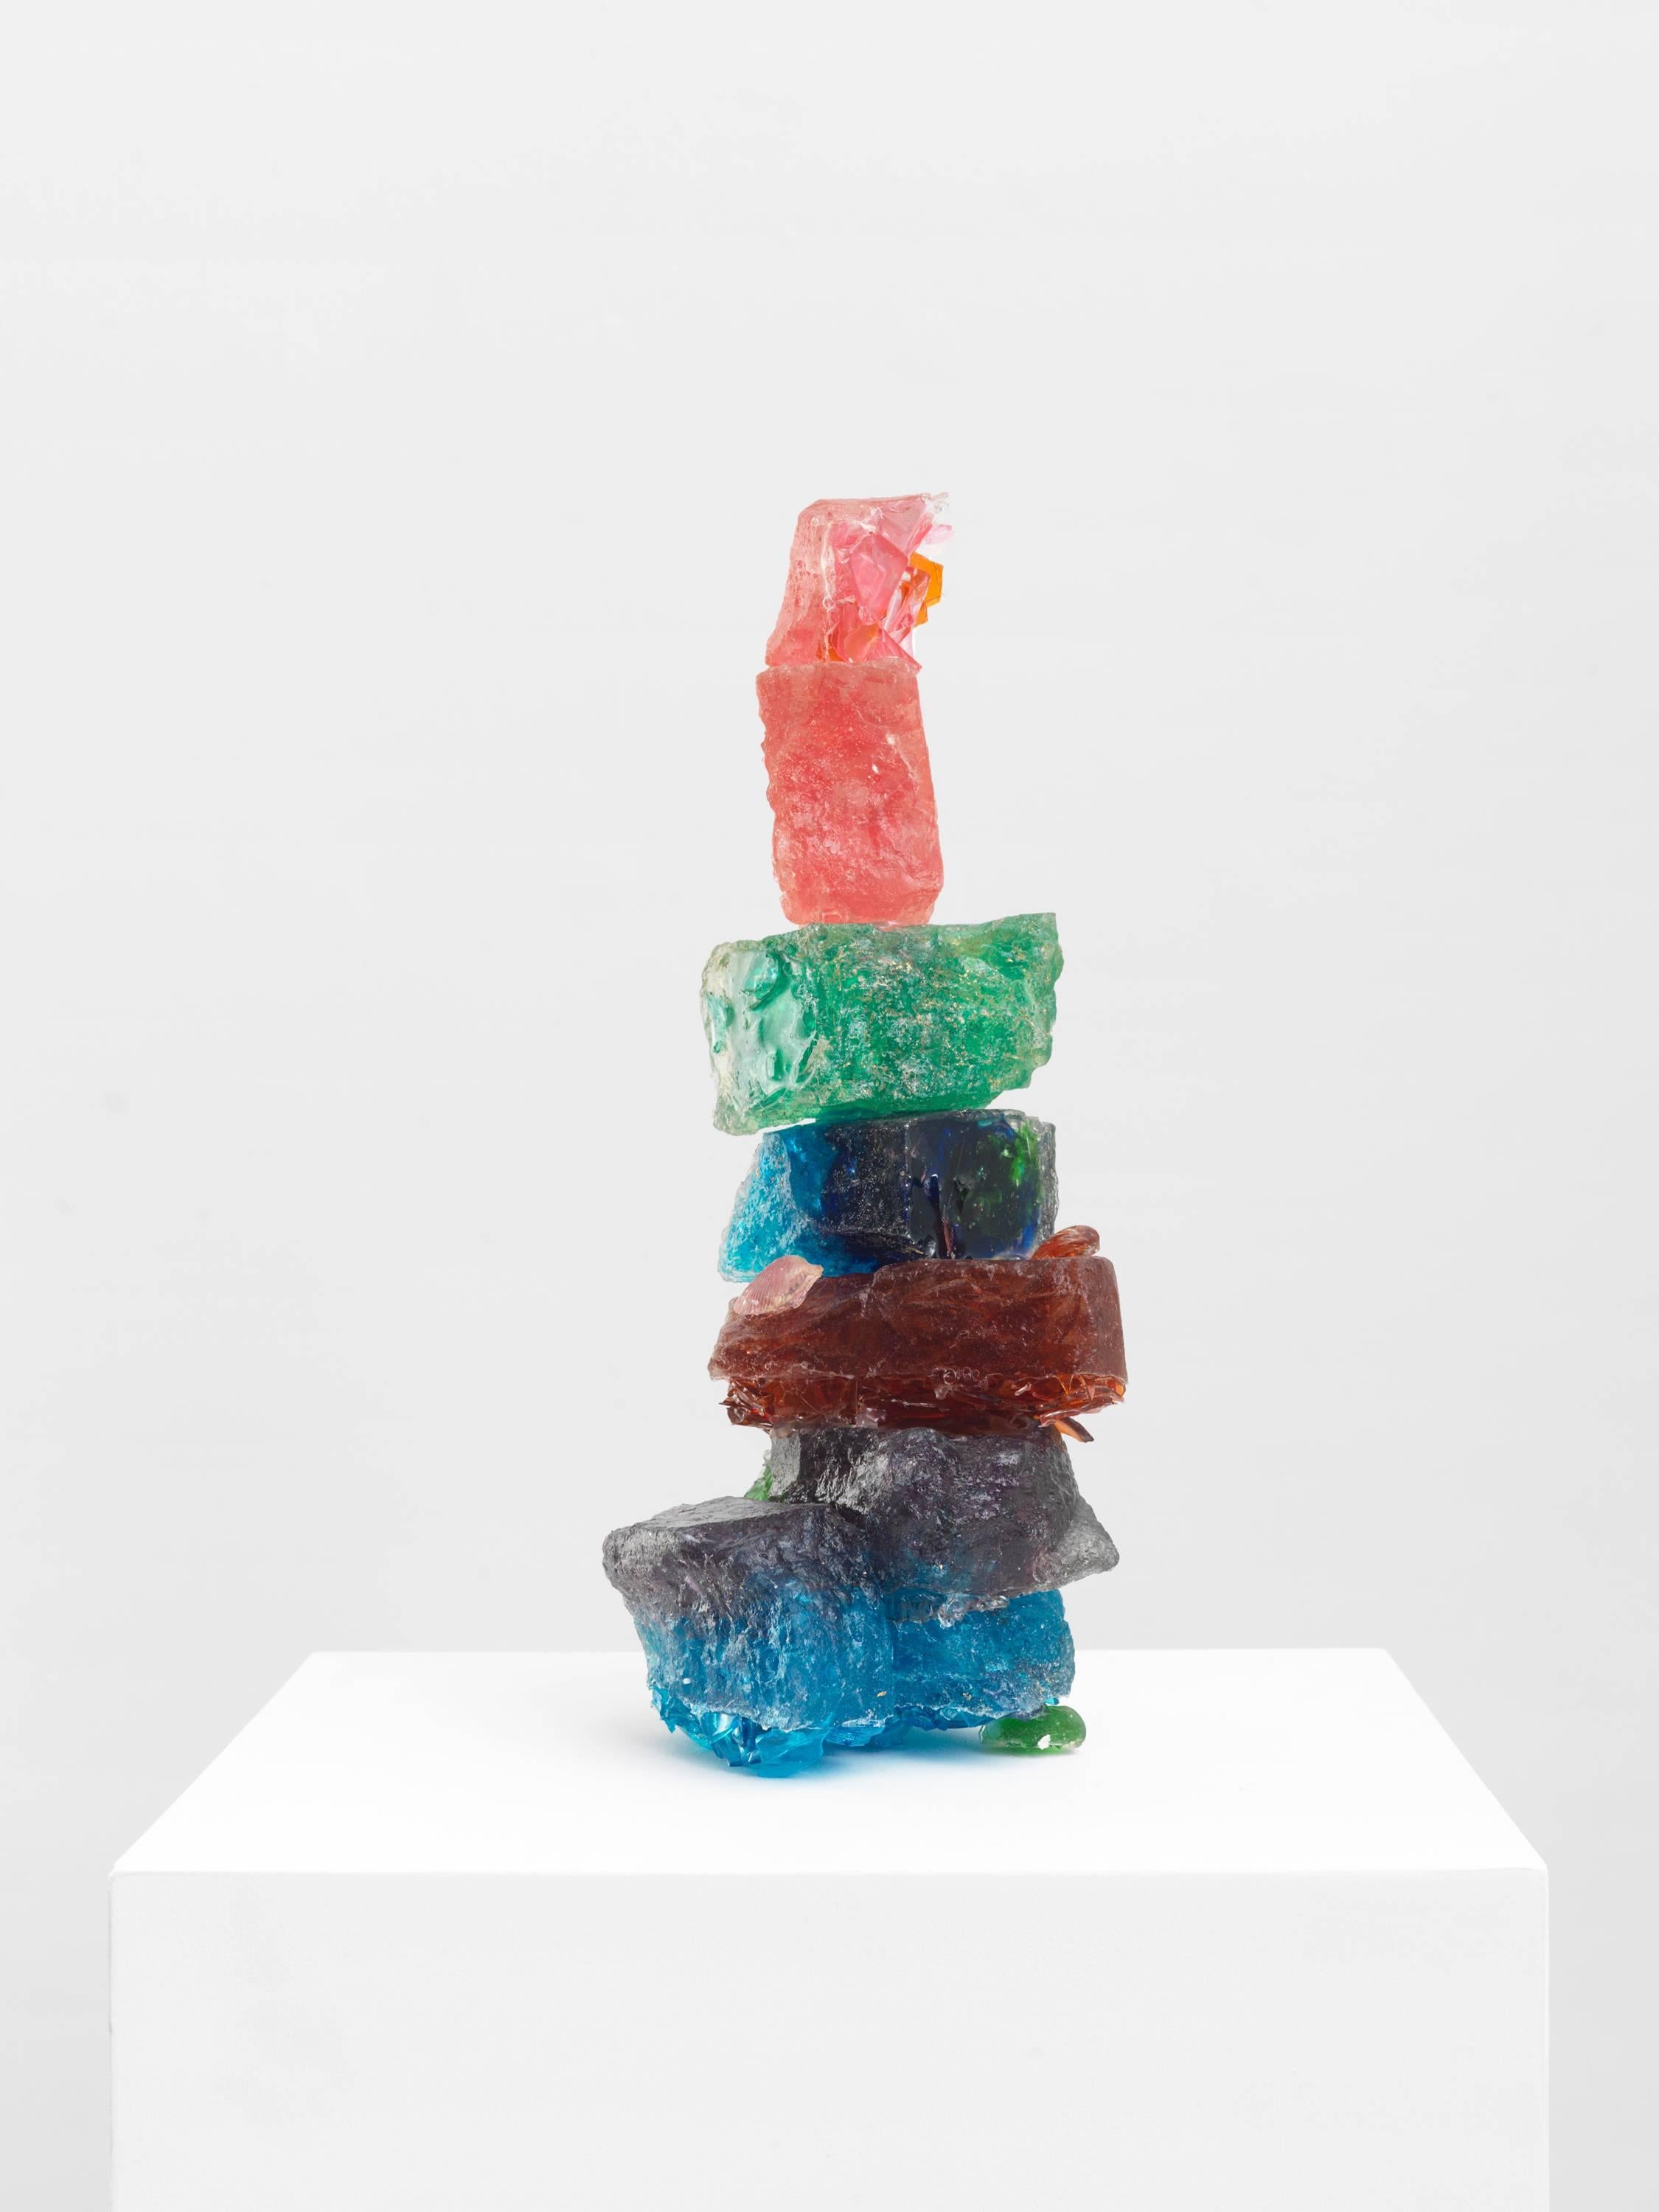 Owens is known for her sculpture made from recycled material and especially her signature process of casting shards of broken glass in resin. The glass, previously used in bottles and other containers, is smashed and reborn as luminous work of arts.